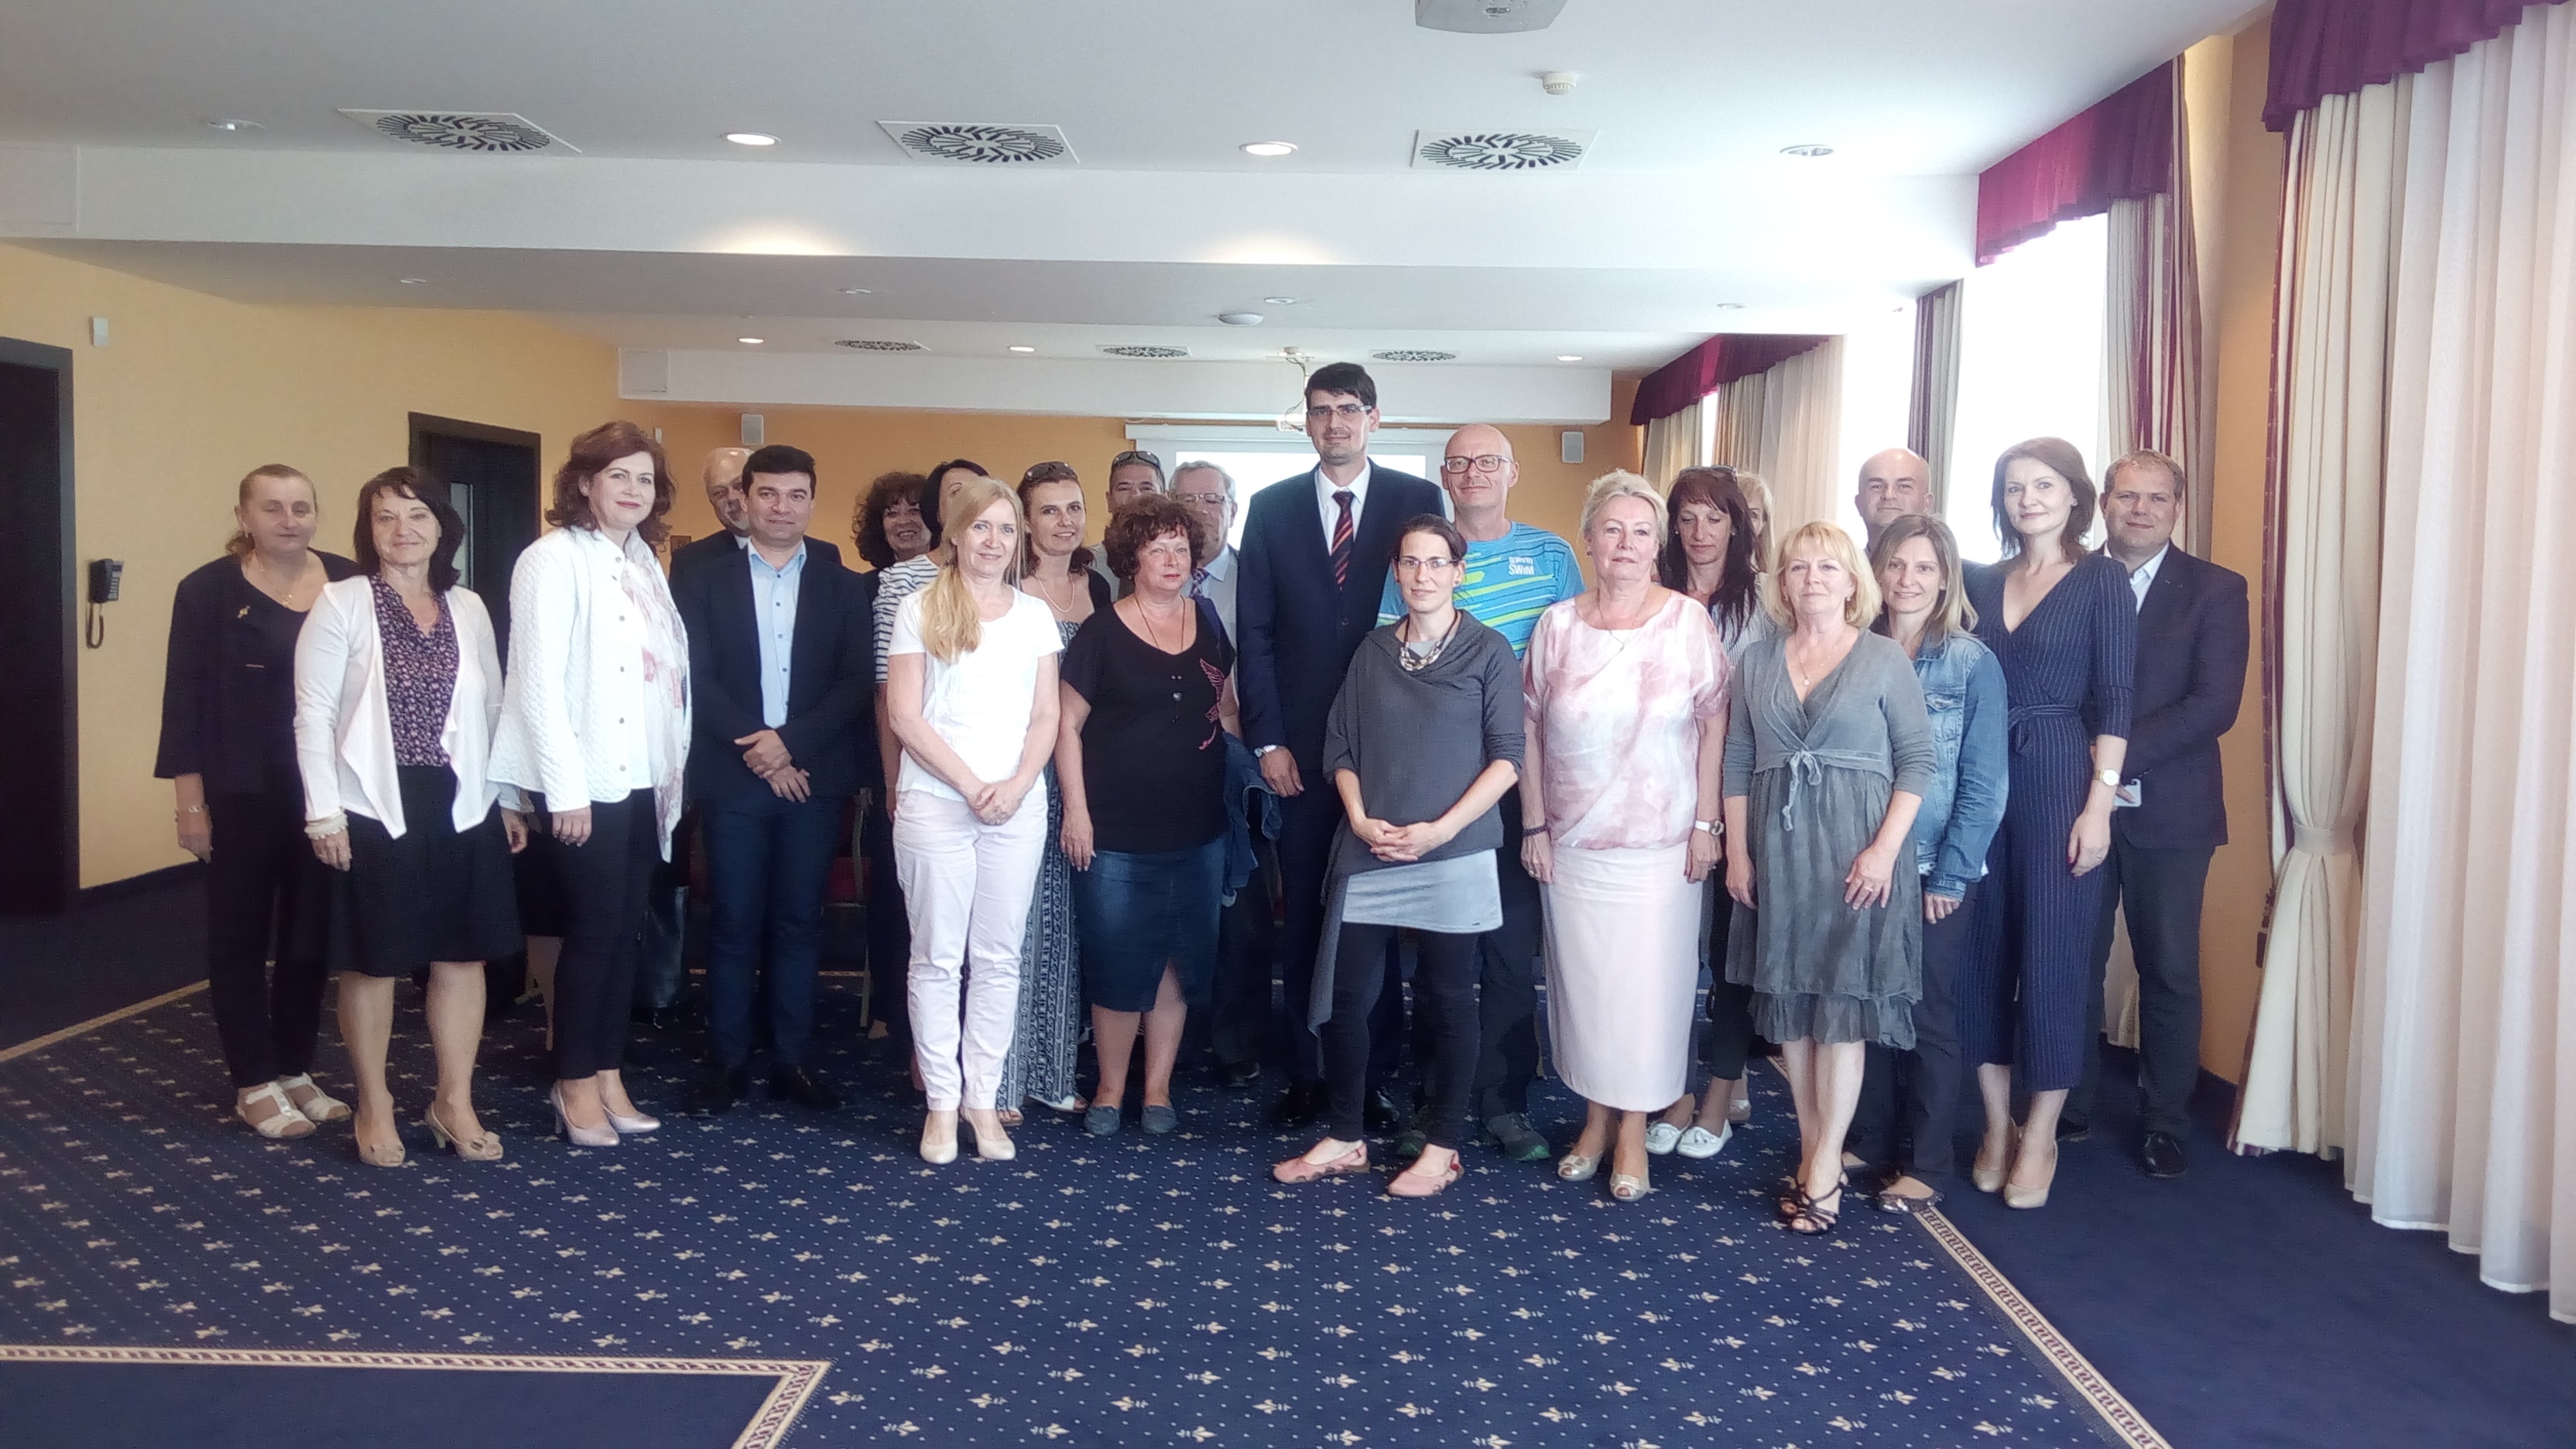 In Slovakia, a new international project on inclusive education - INSCHOOL - was launched